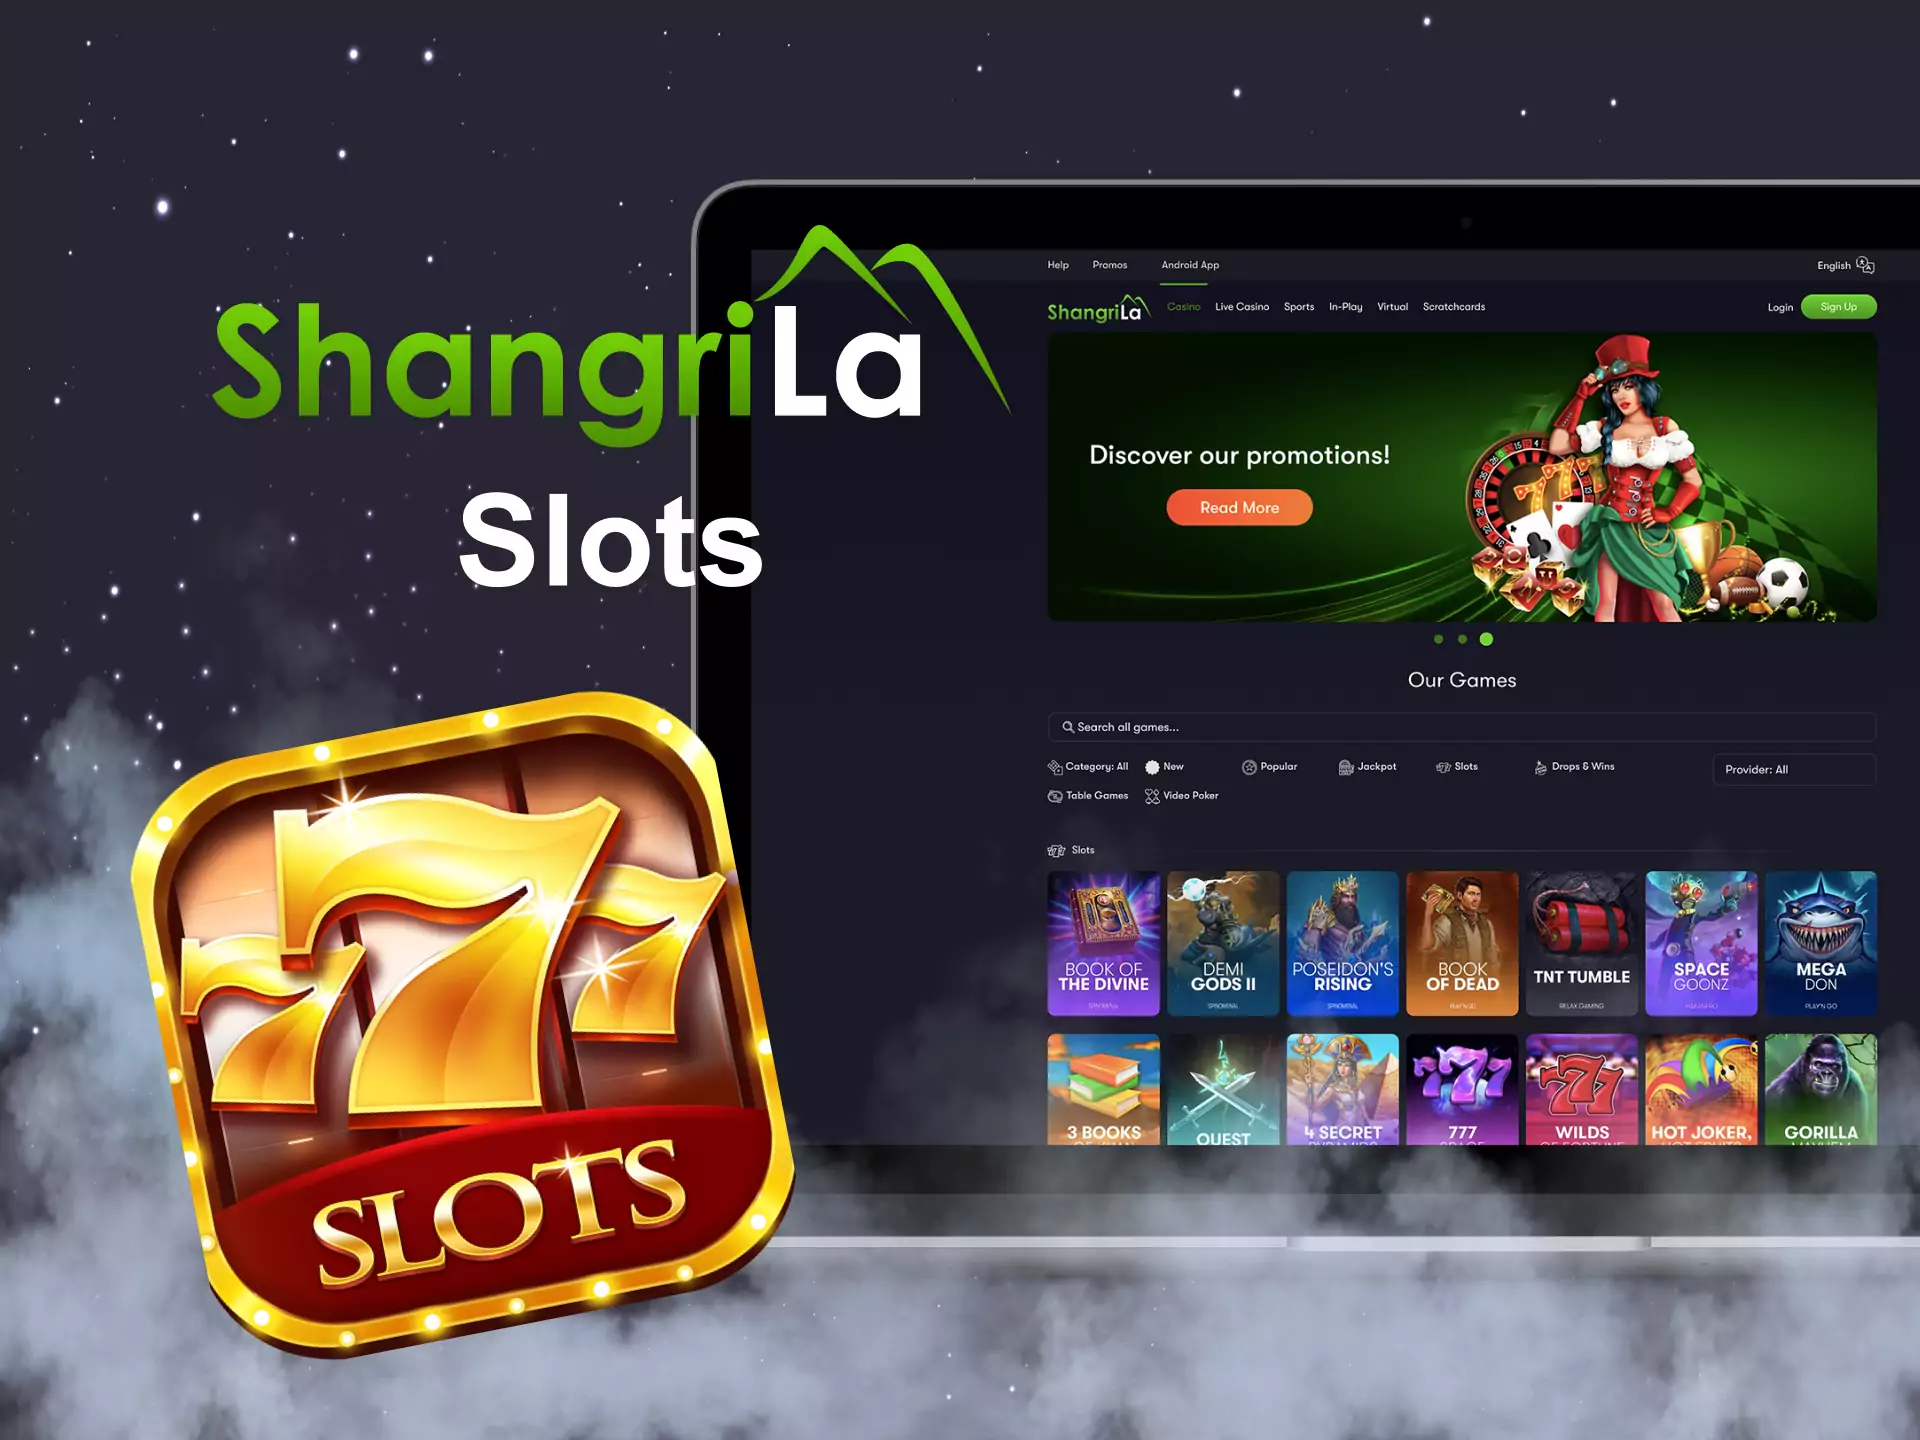 At Shangri La, you can play colourful online slots.